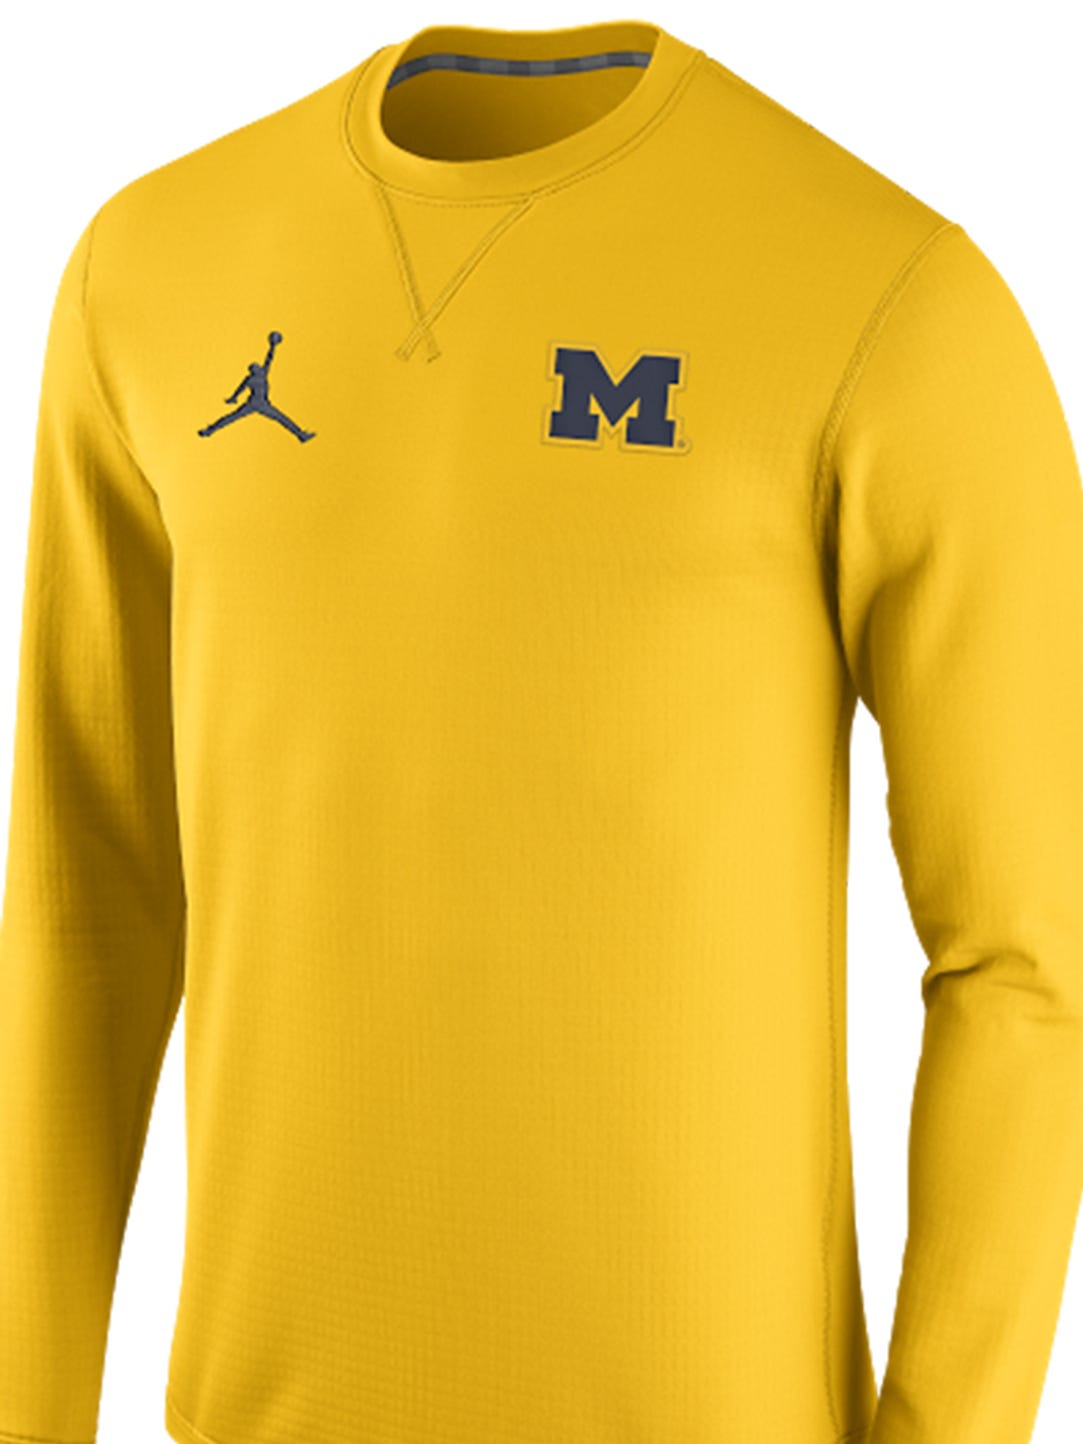 Check it out New Michigan football uniform revealed